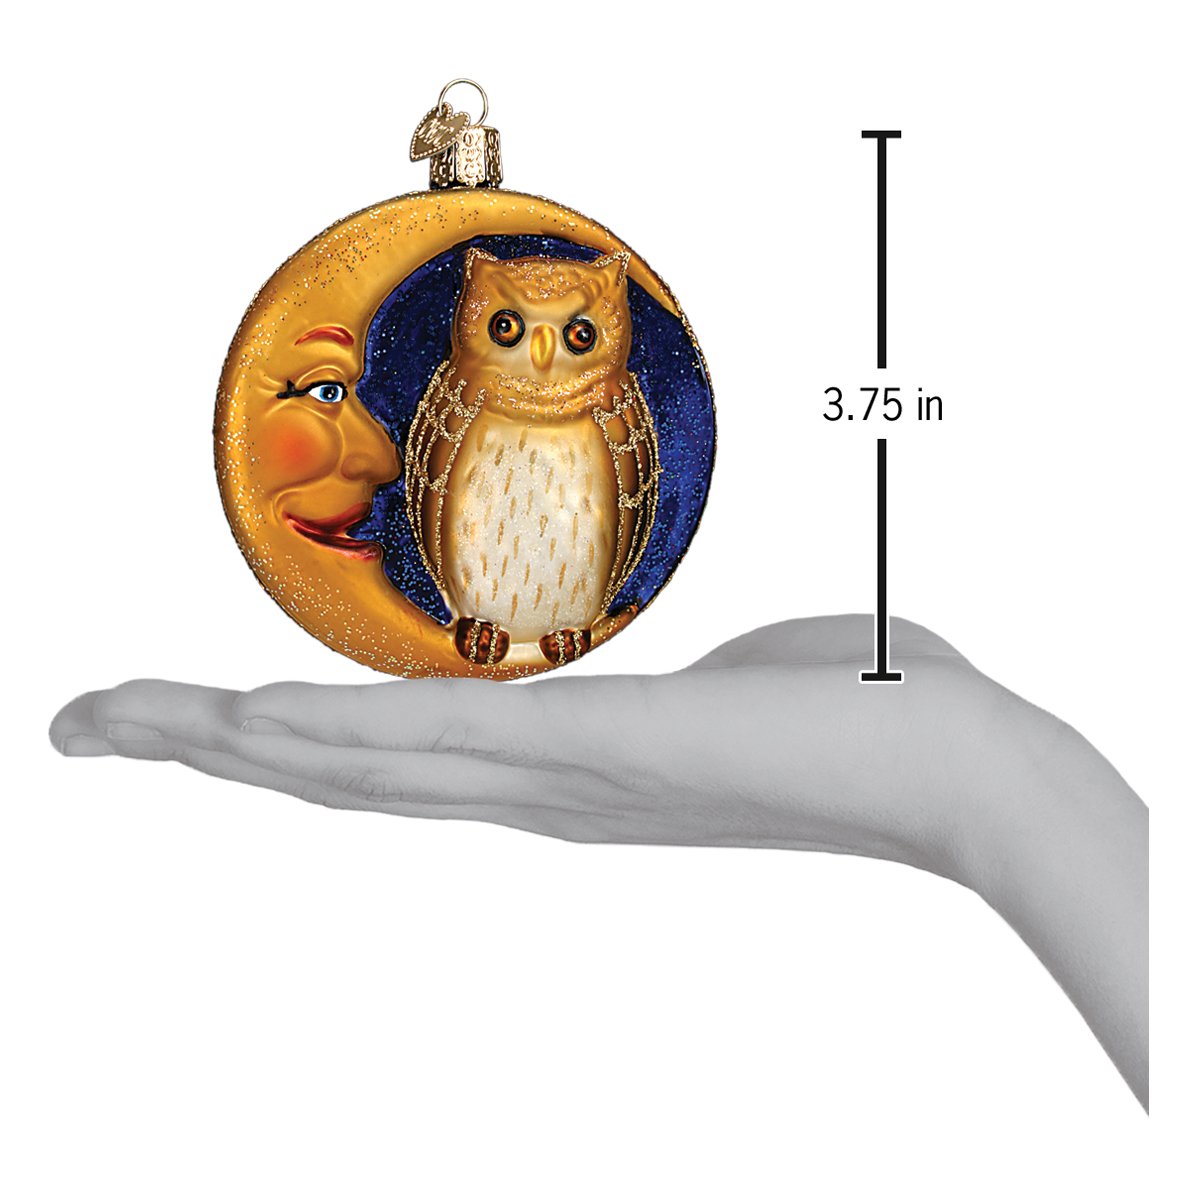 Old World Christmas - Owl In Moon Ornament    